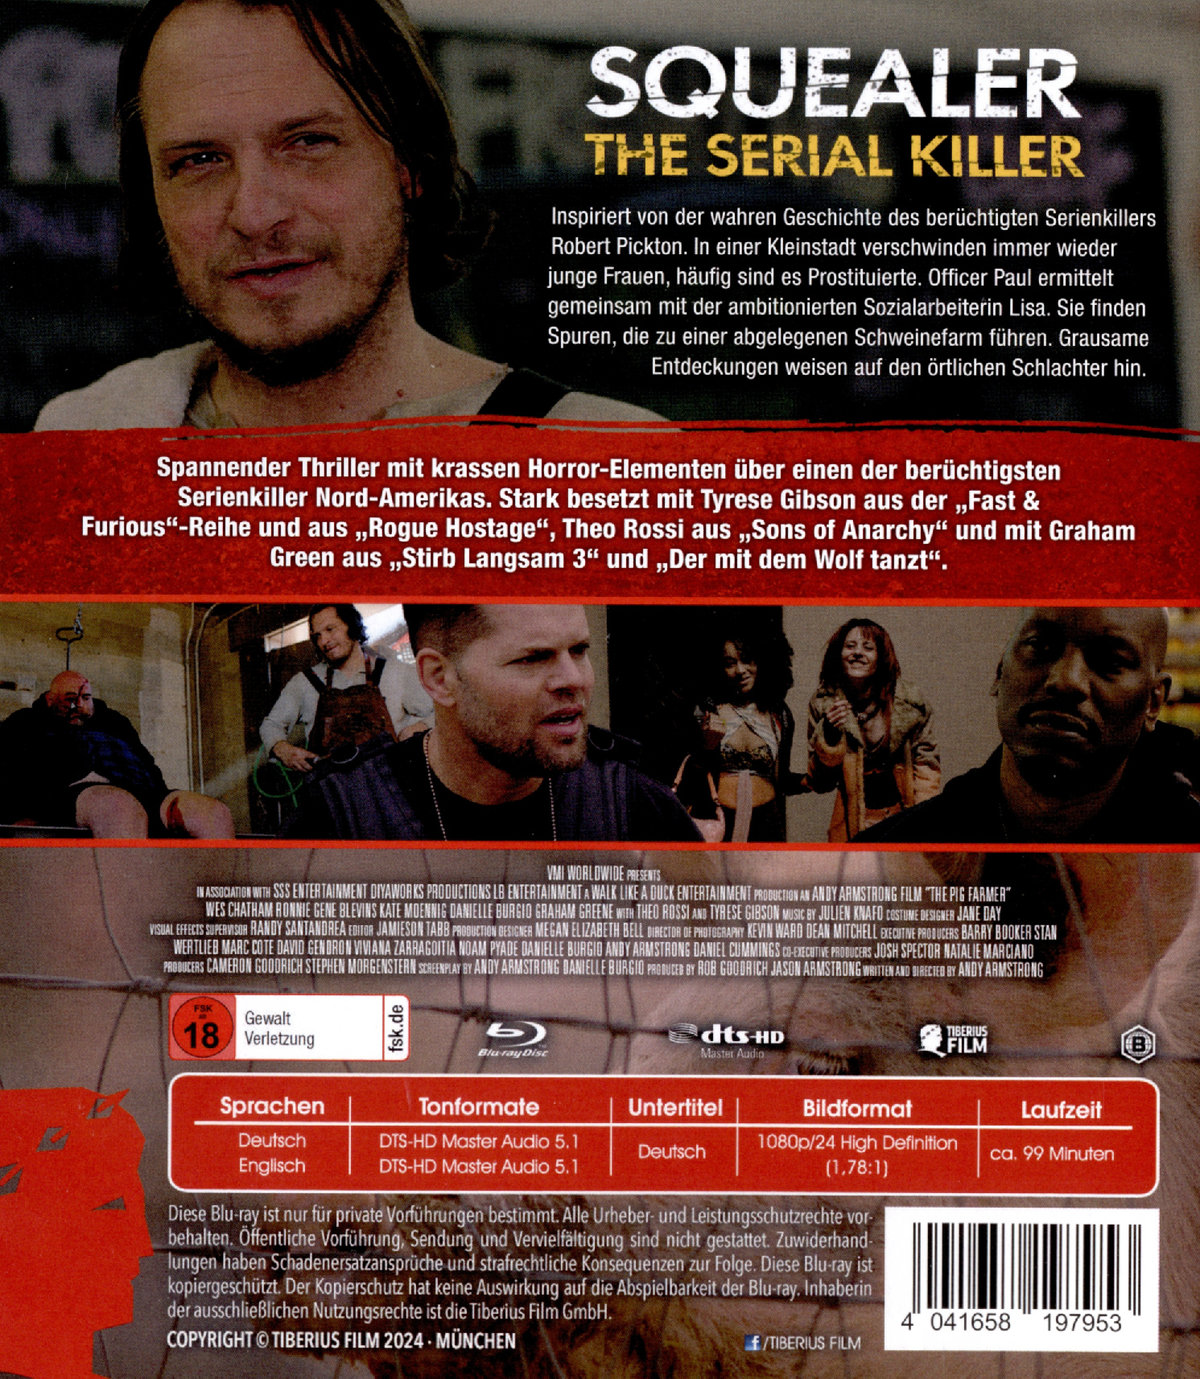 Squealer - The Serial Killer  (Blu-ray Disc)